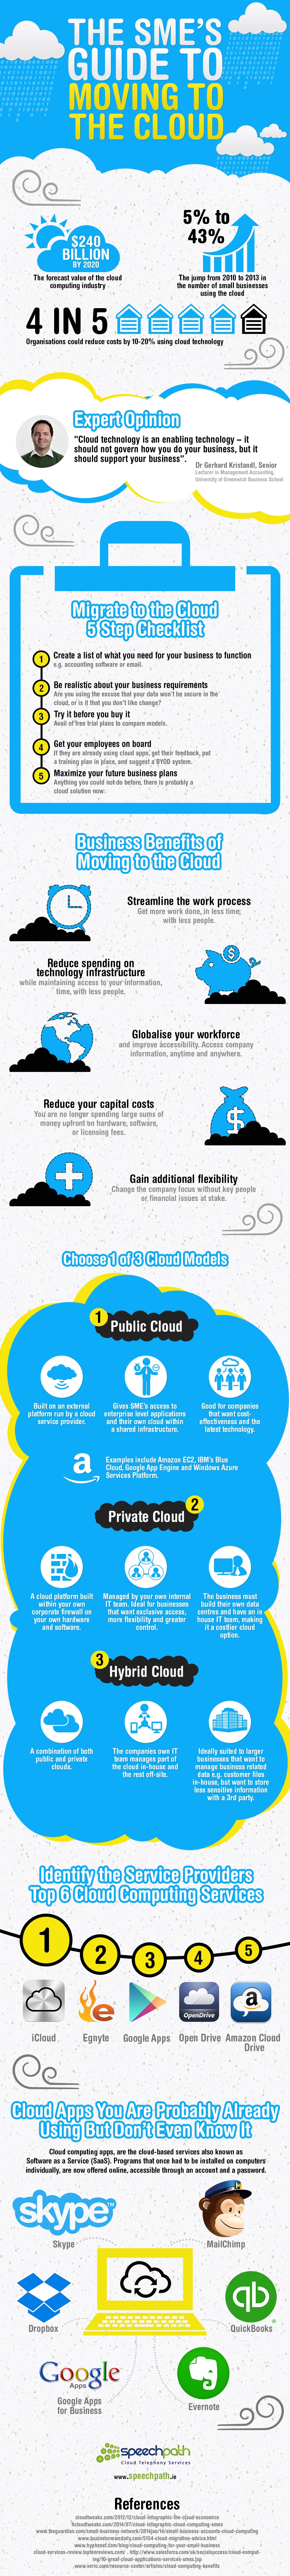 The-SME’s-Guide-to-Moving-to-the Cloud-Infographic